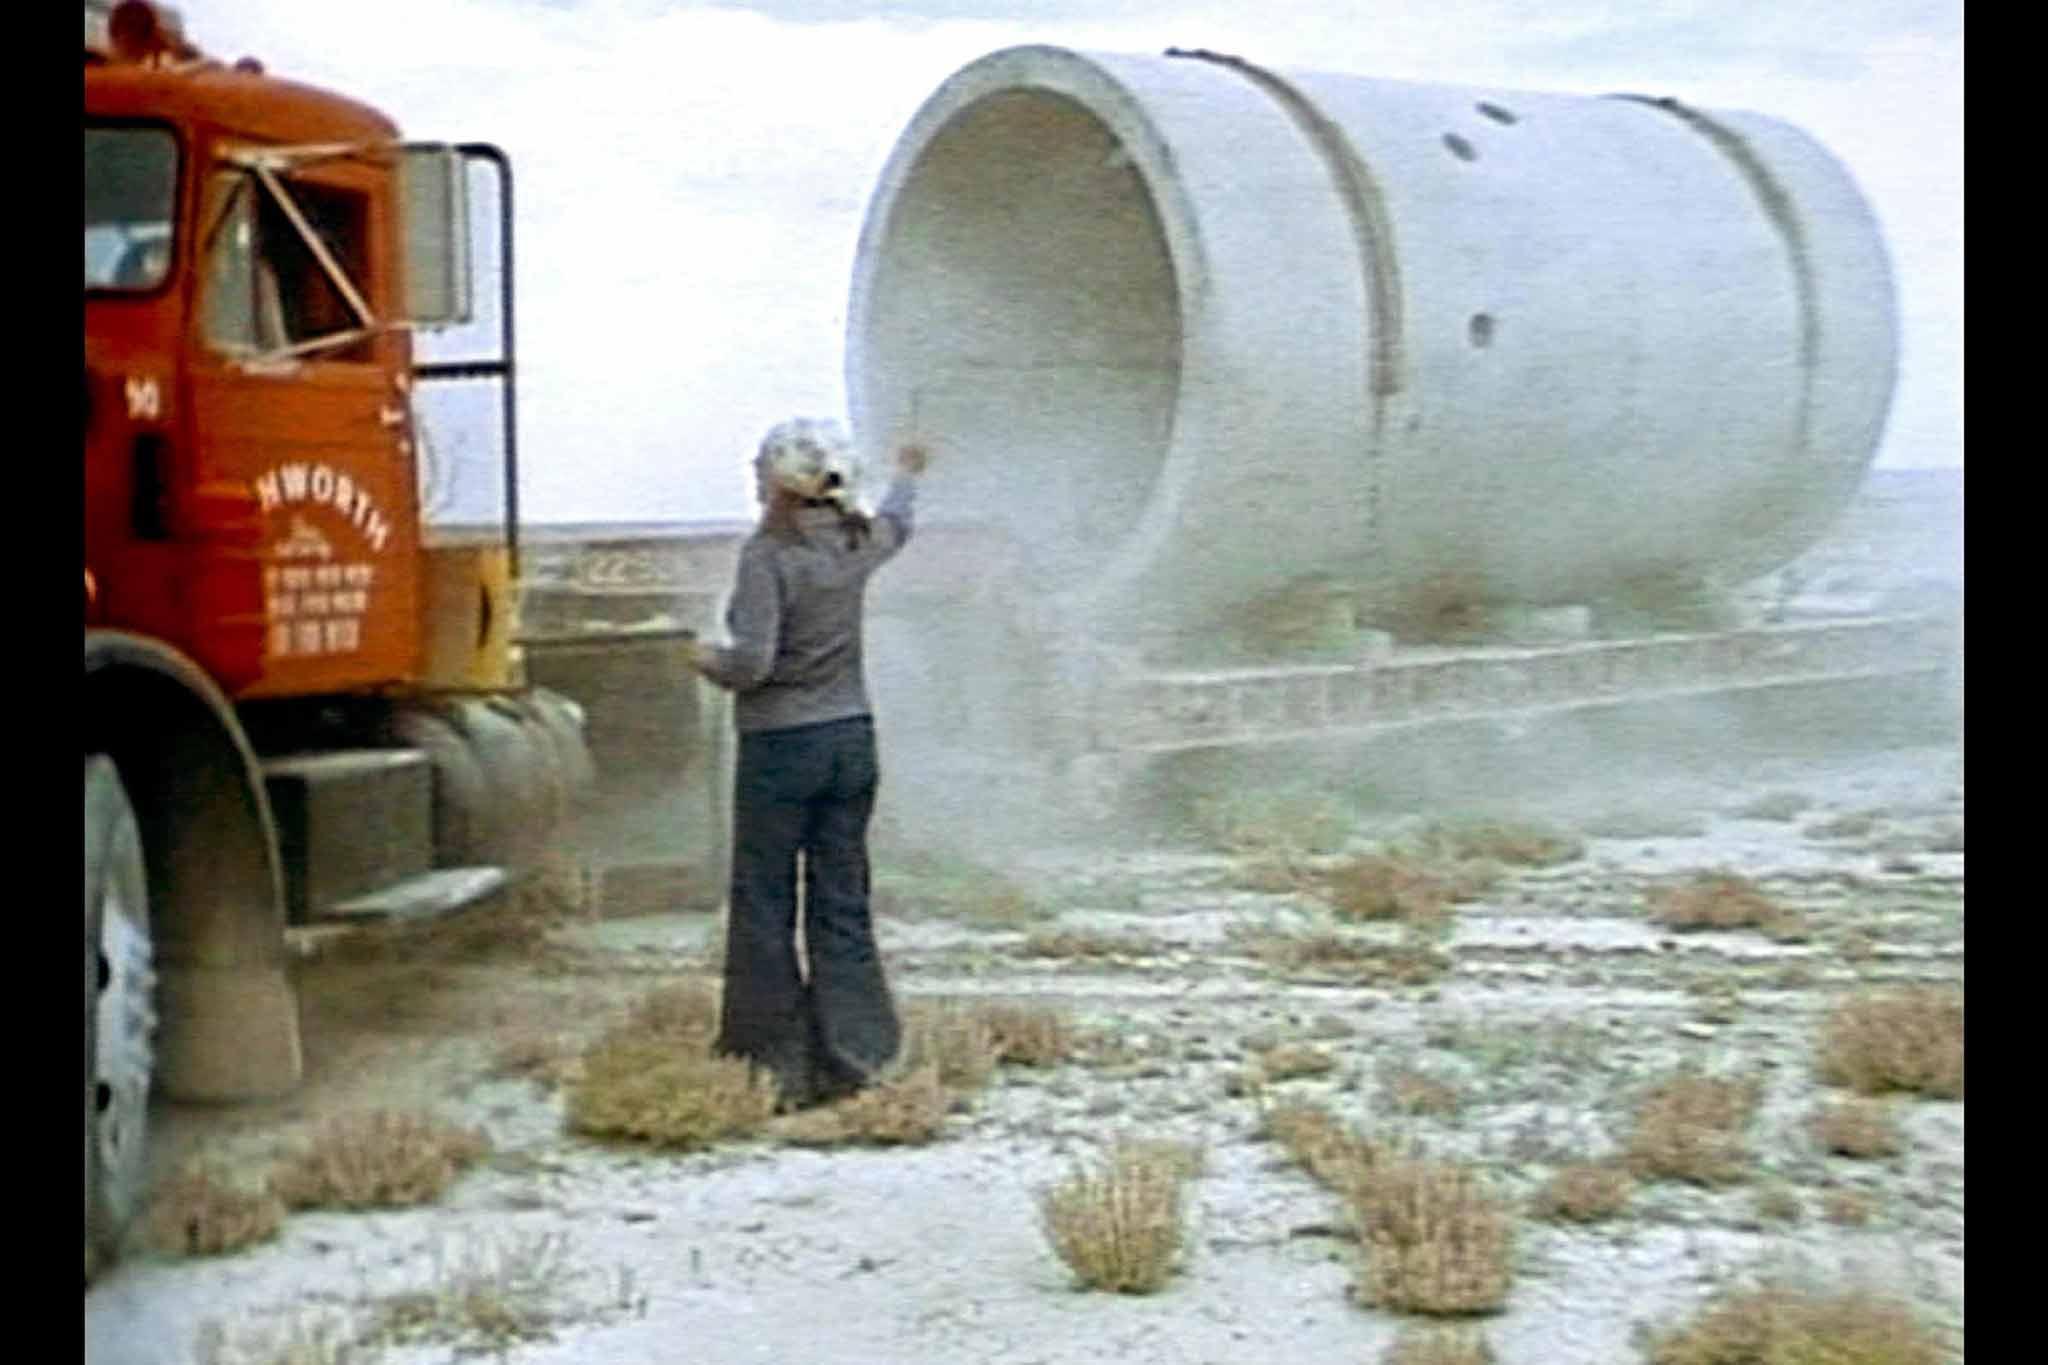 A film still from the construction of Holt's Sun Tunnels from the film, Sun Tunnels showing Holt directing a truck driver who is delivering one of the concrete tunnels.